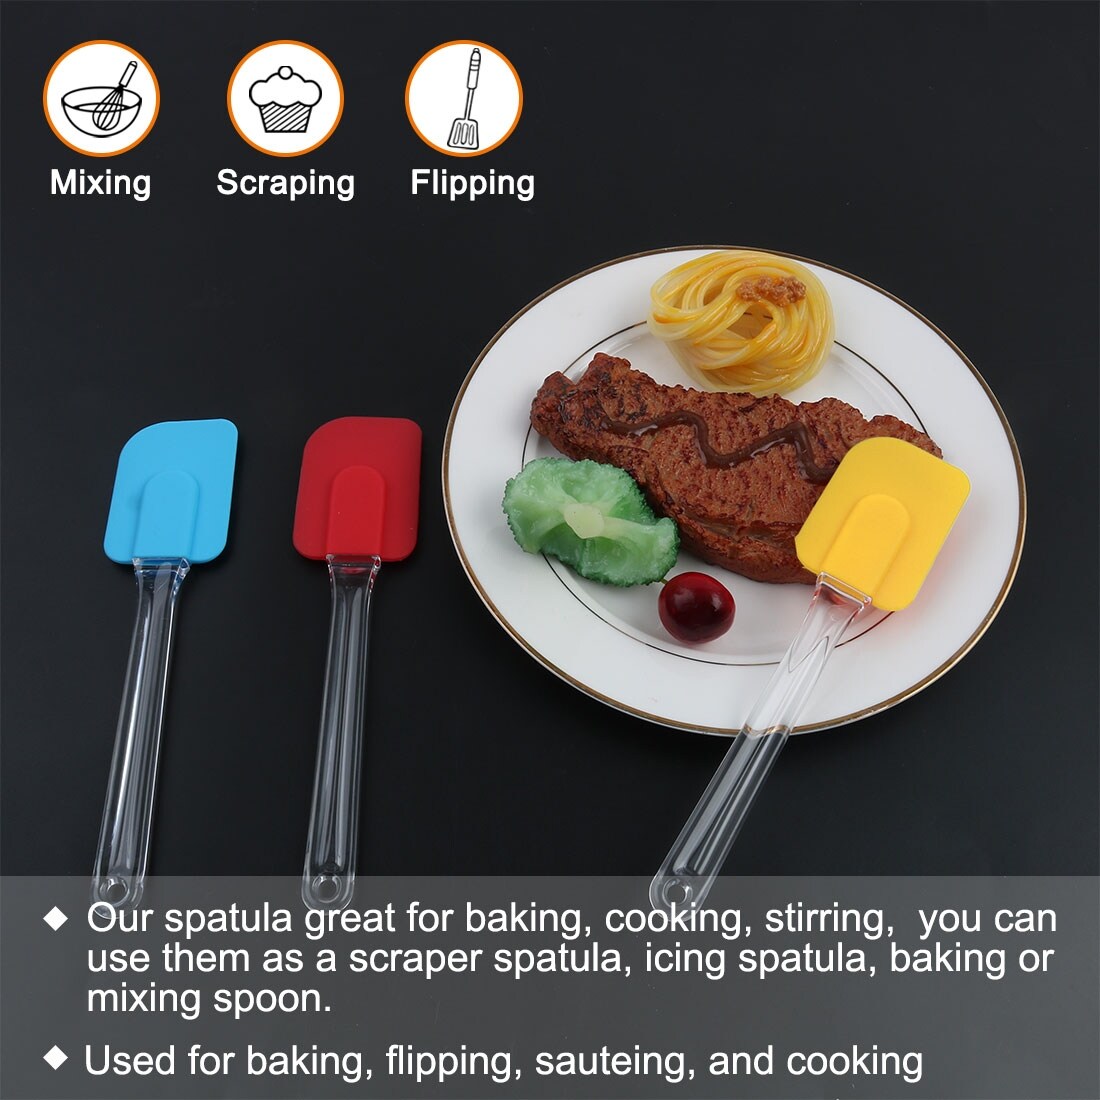 https://ak1.ostkcdn.com/images/products/is/images/direct/7c64cd8130bdd243944faba0d45155dc0a60468d/3pcs-Flexible-Silicone-Spatula-Set-Heat-Resistant-Kitchen-Non-Stick-Spatula-Set-for-Cooking-Baking-Blue-Yellow-Red.jpg